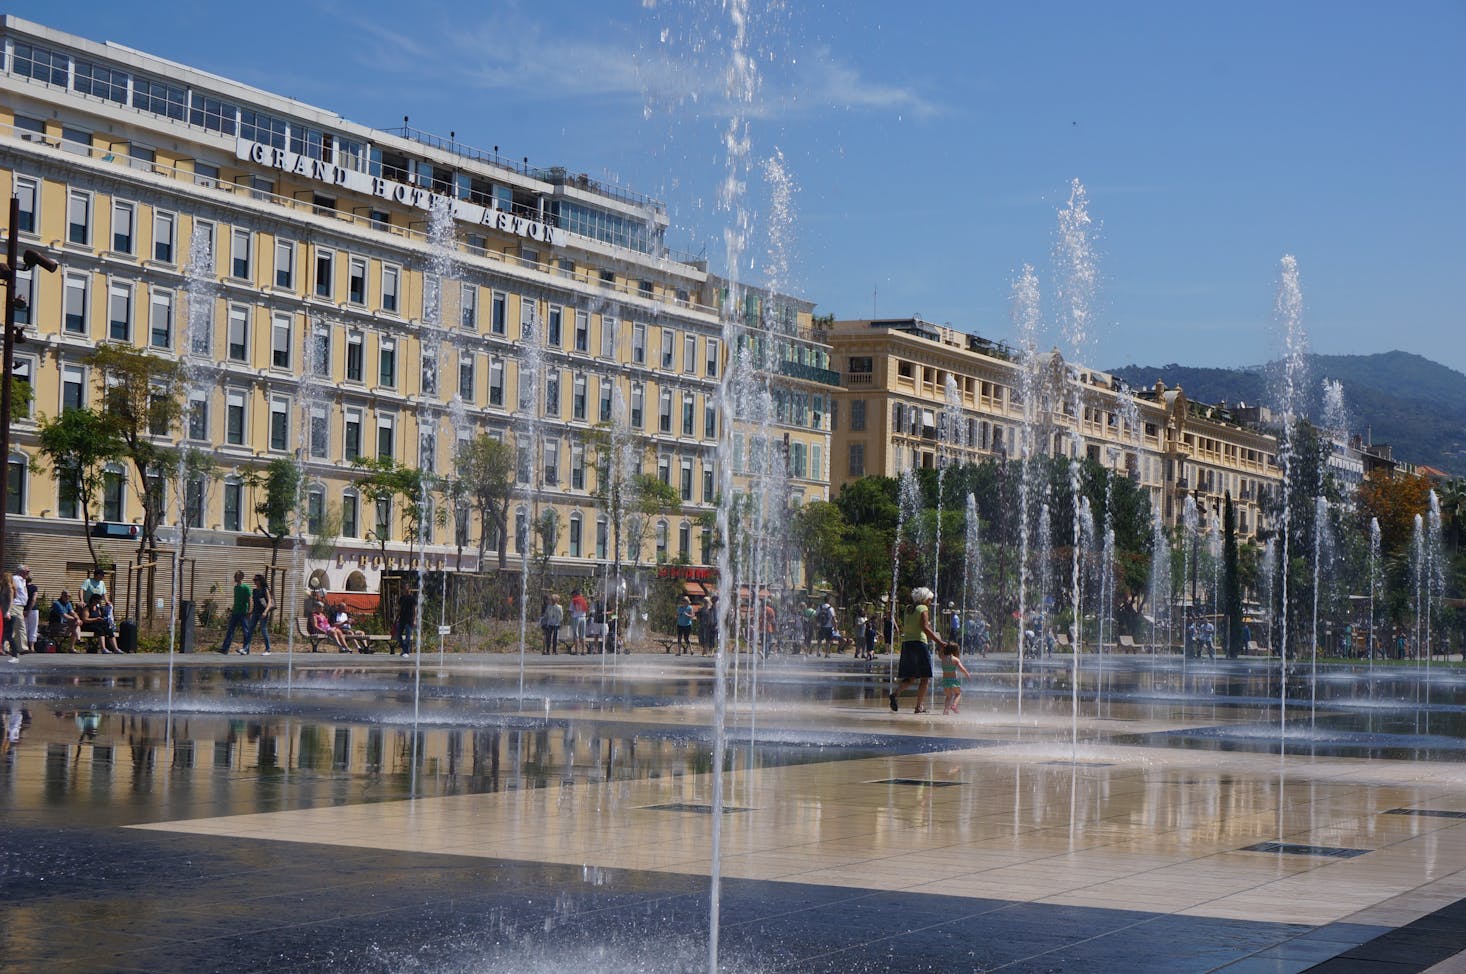 Fountains in Nice, France